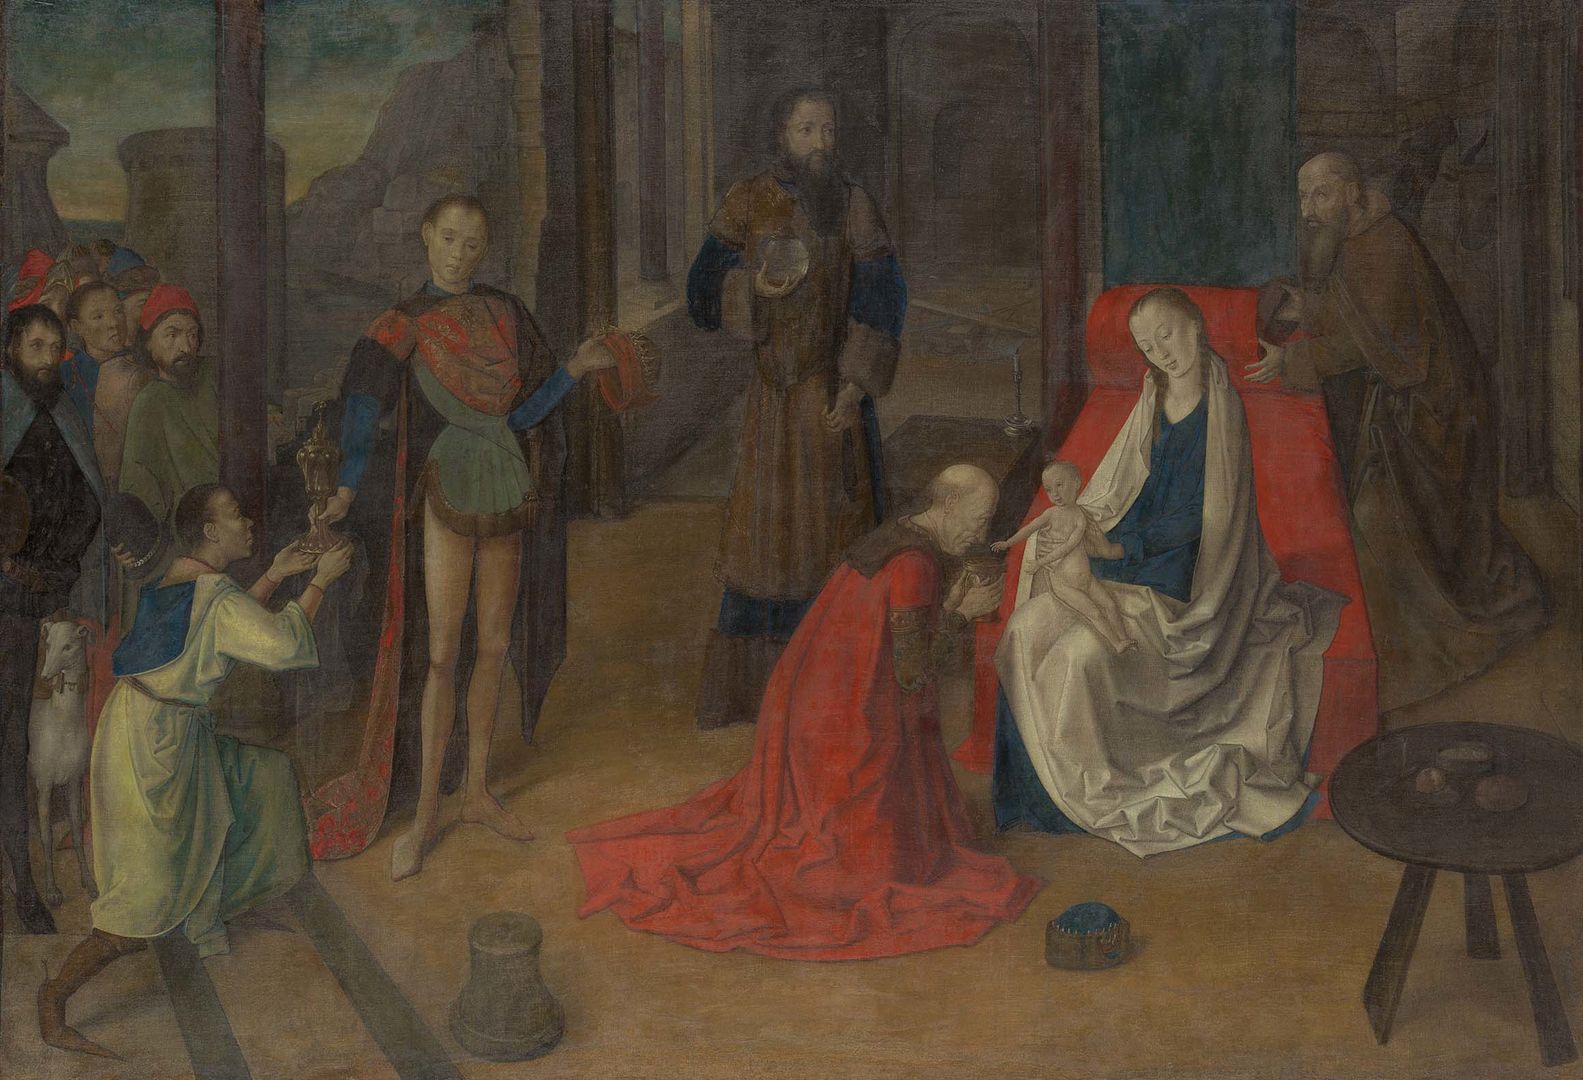 A painting of the Adoration of the Magi in which Three Black figures can be seen.